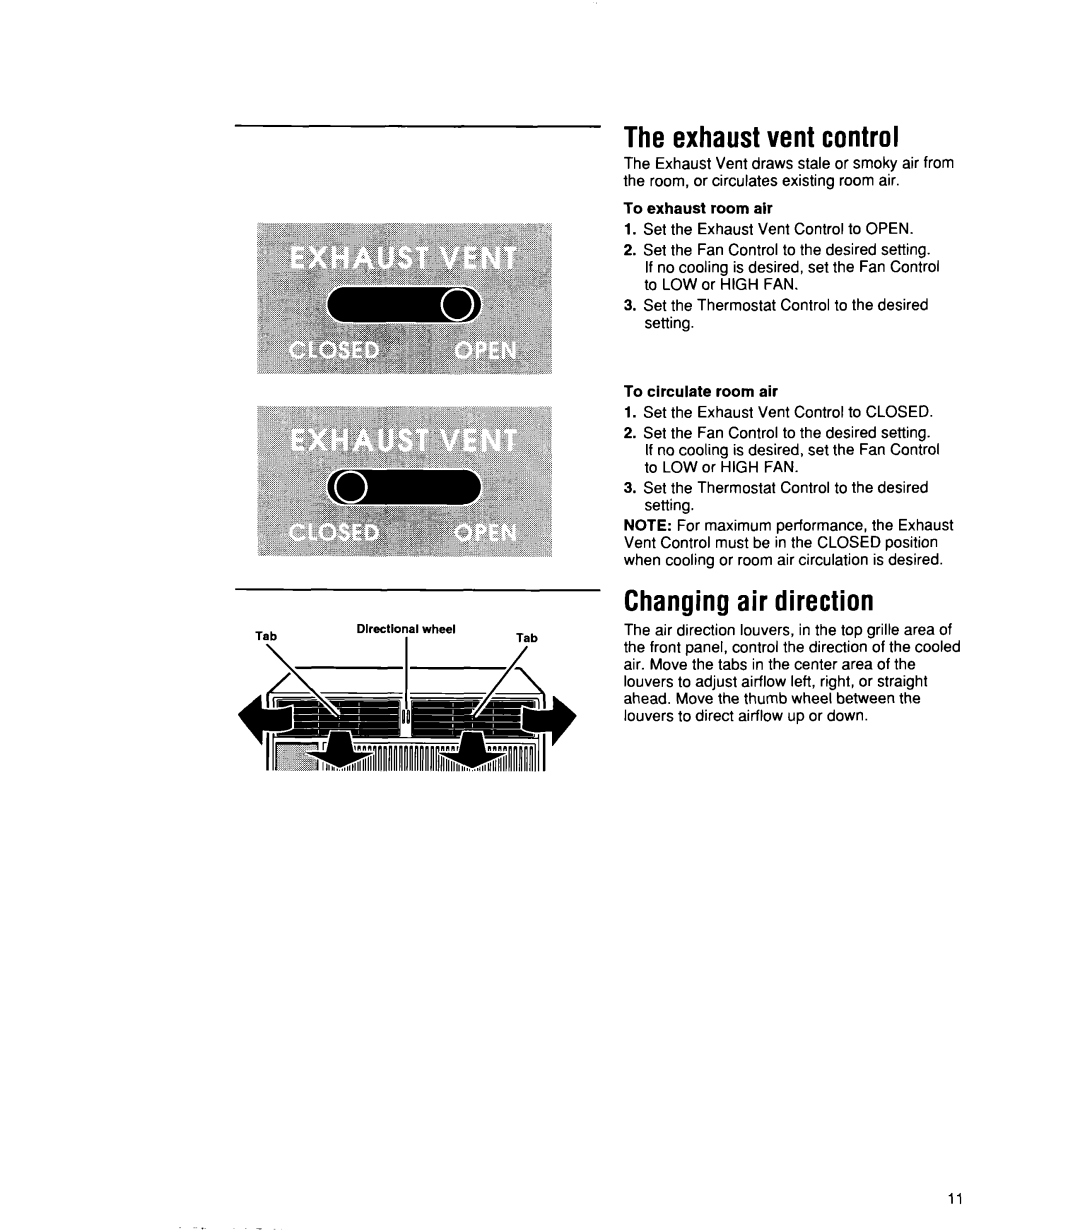 Whirlpool ACU072XE installation instructions The exhaustvent control, Changingair direction 